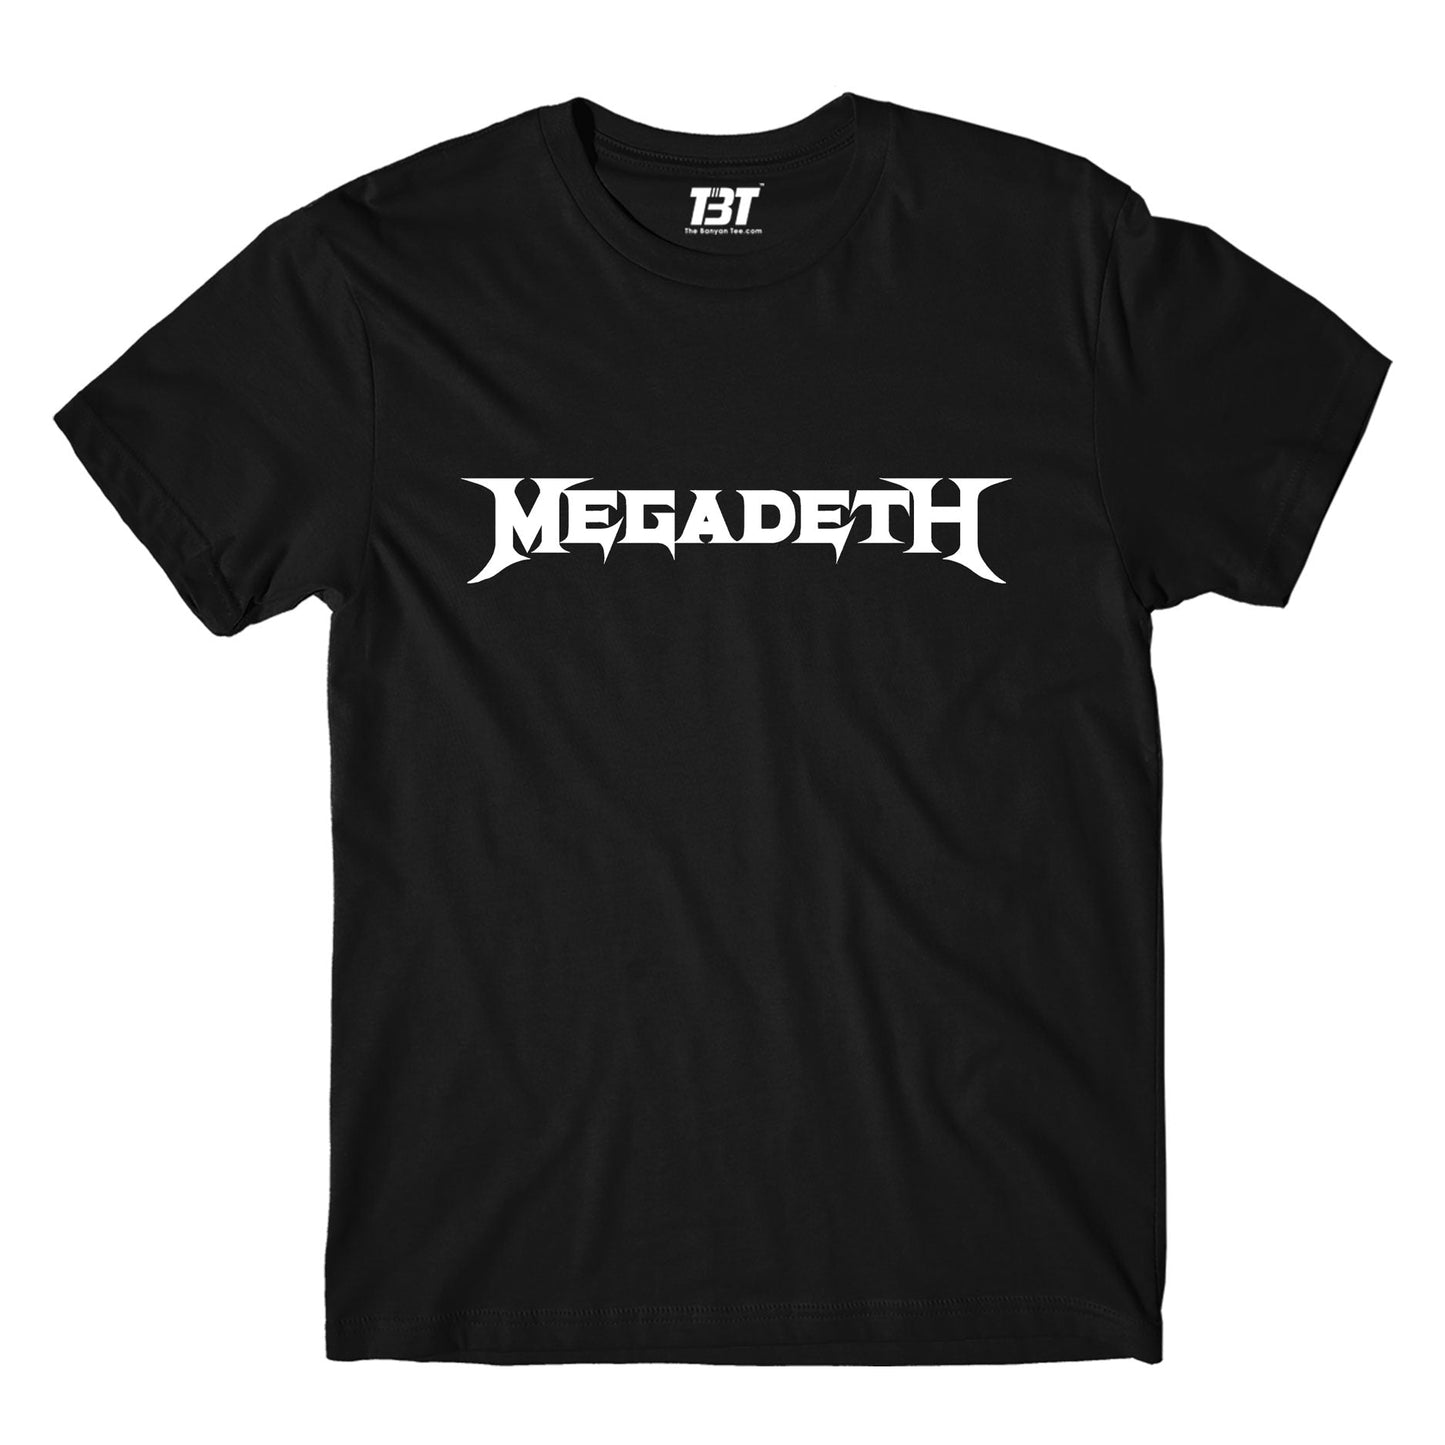 the banyan tee merch on sale Megadeth T shirt - On Sale - 3XL (Chest size 48 IN)